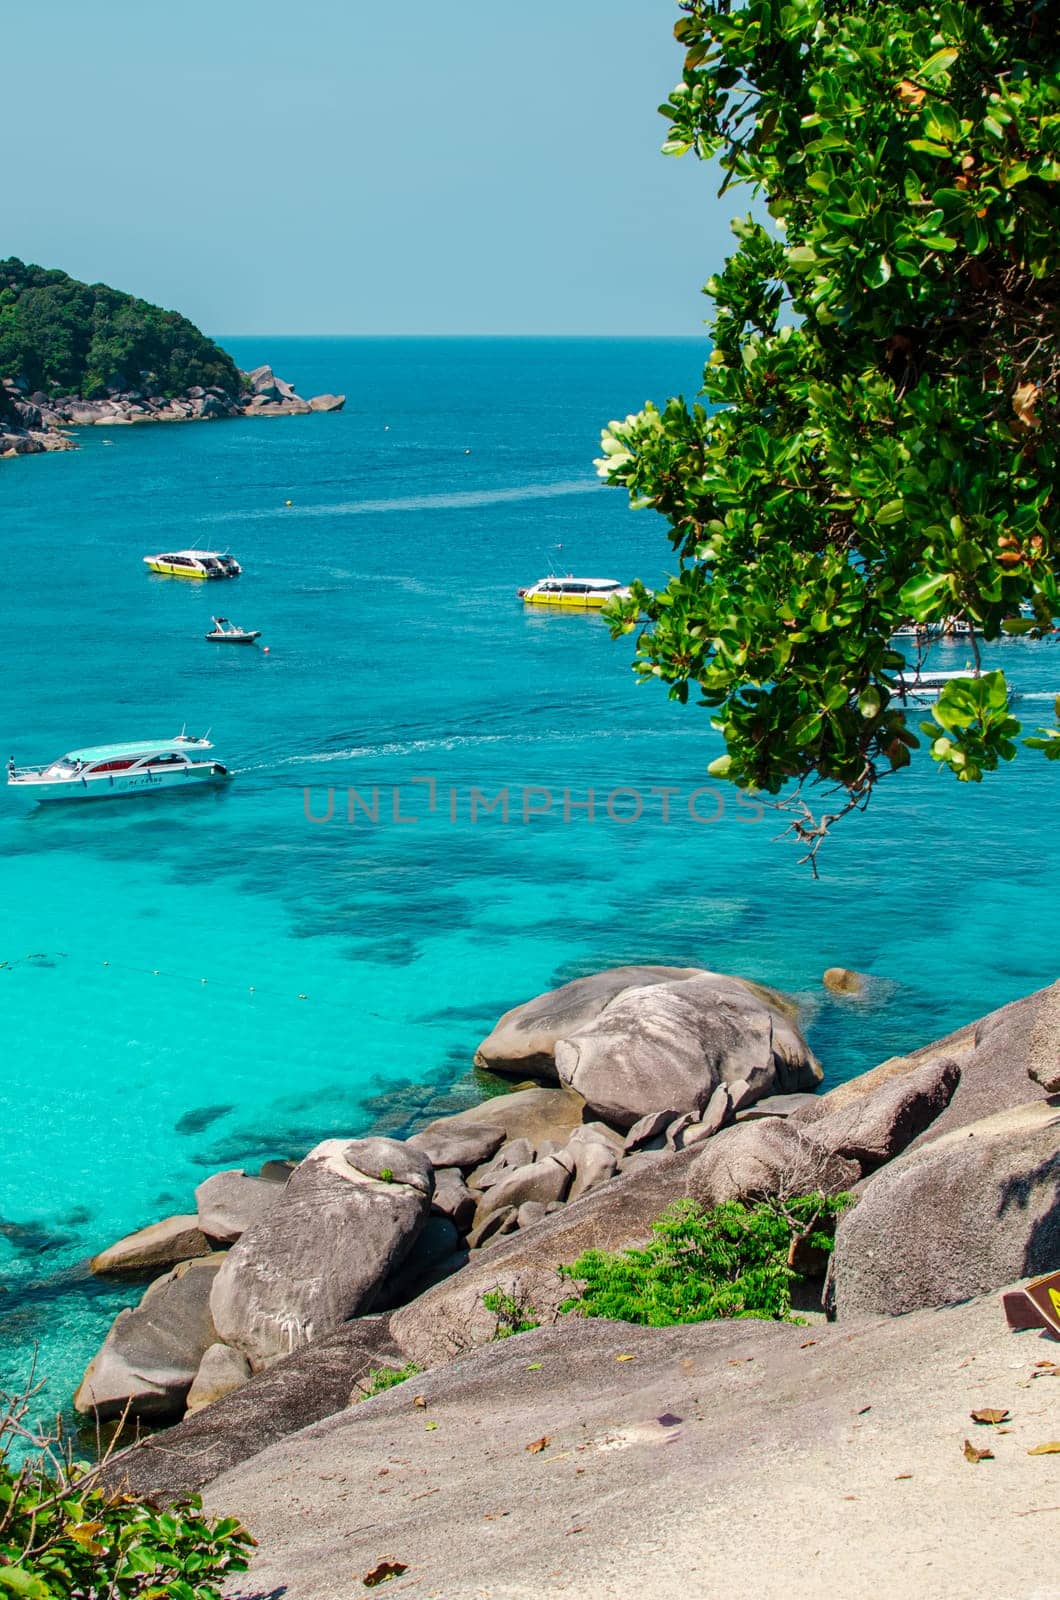 Tropical islands of ocean blue sea water and white sand beach at Similan Islands with famous Sail Rock, Phang Nga Thailand nature landscape. High quality photo